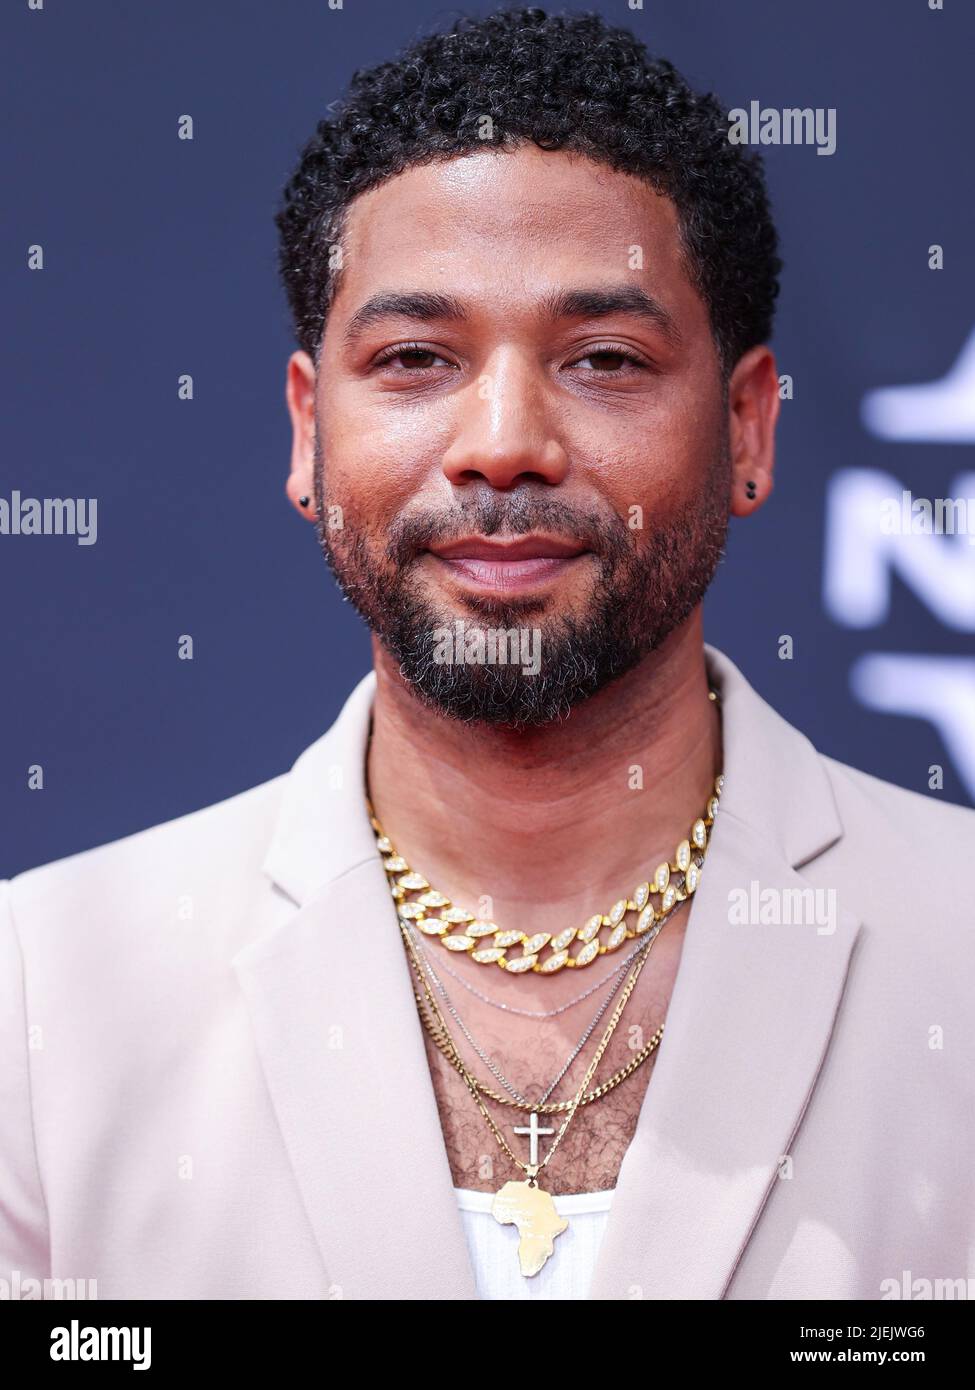 LOS ANGELES, CALIFORNIA, USA - JUNE 26: American actor Jussie Smollett arrives at the BET Awards 2022 held at Microsoft Theater at L.A. Live on June 26, 2022 in Los Angeles, California, United States. (Photo by Xavier Collin/Image Press Agency) Credit: Image Press Agency/Alamy Live News Stock Photo